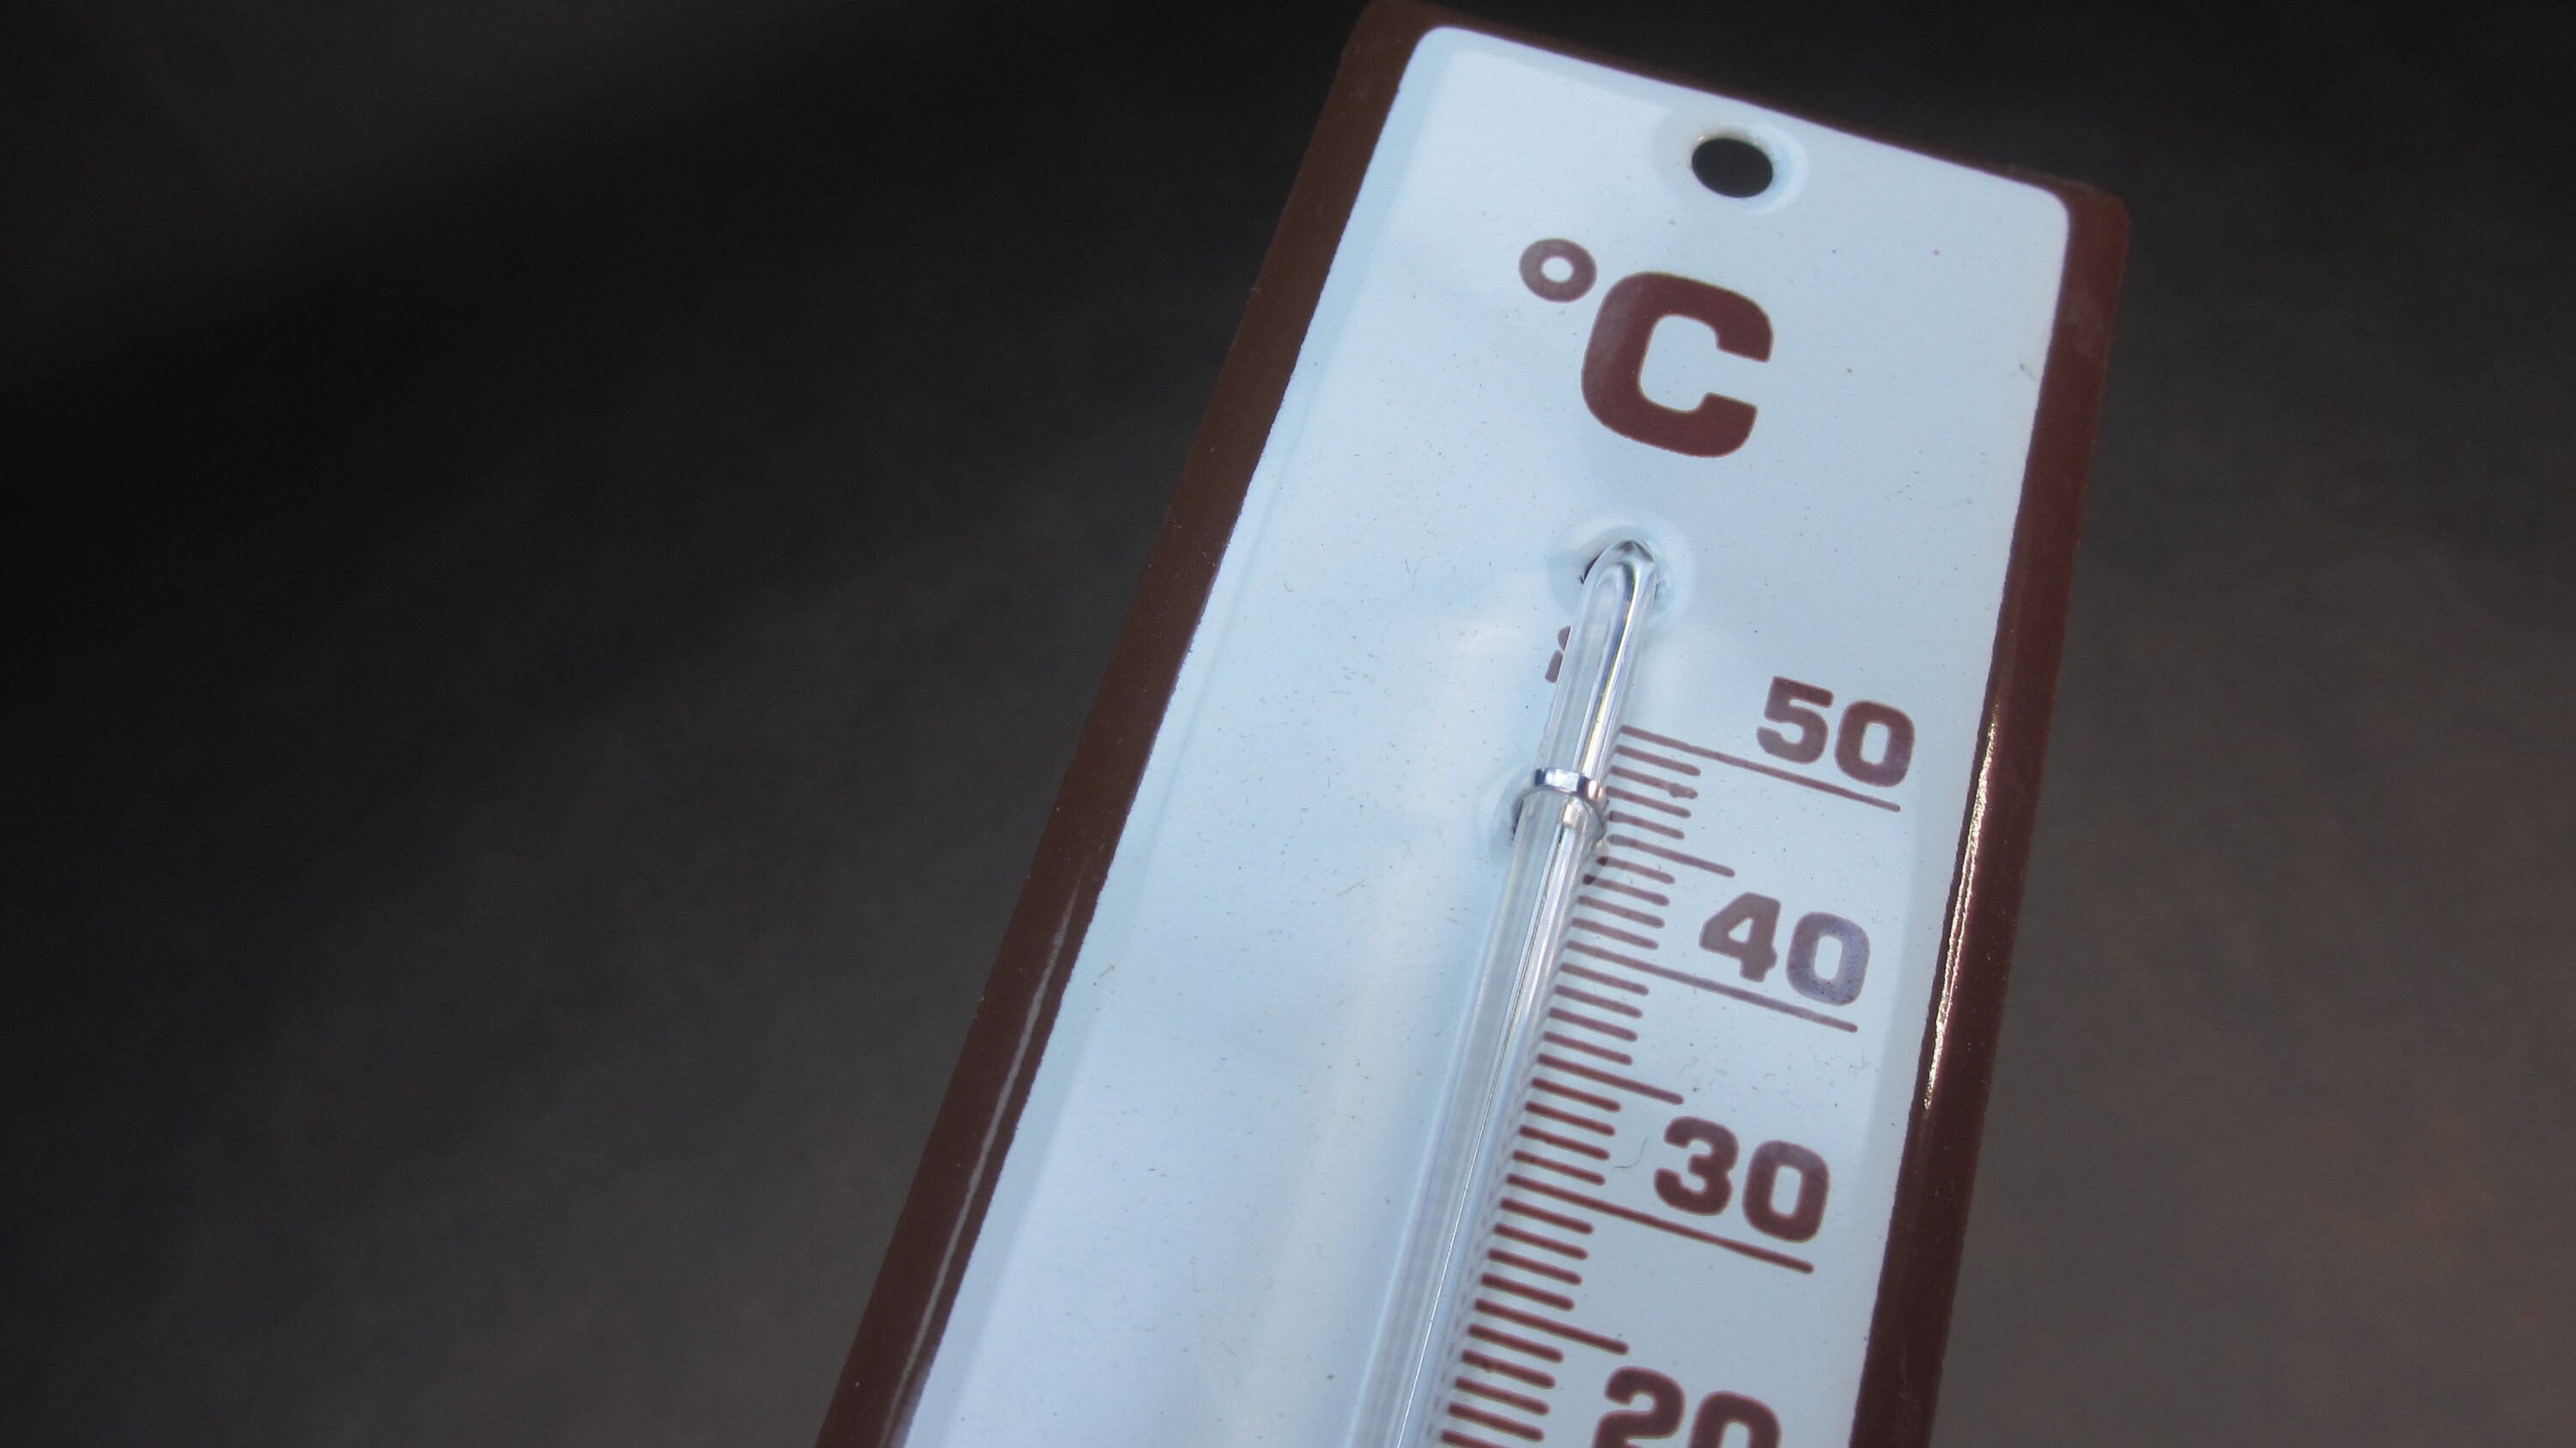 Analogue indoor-outdoor thermometer made of stainless steel